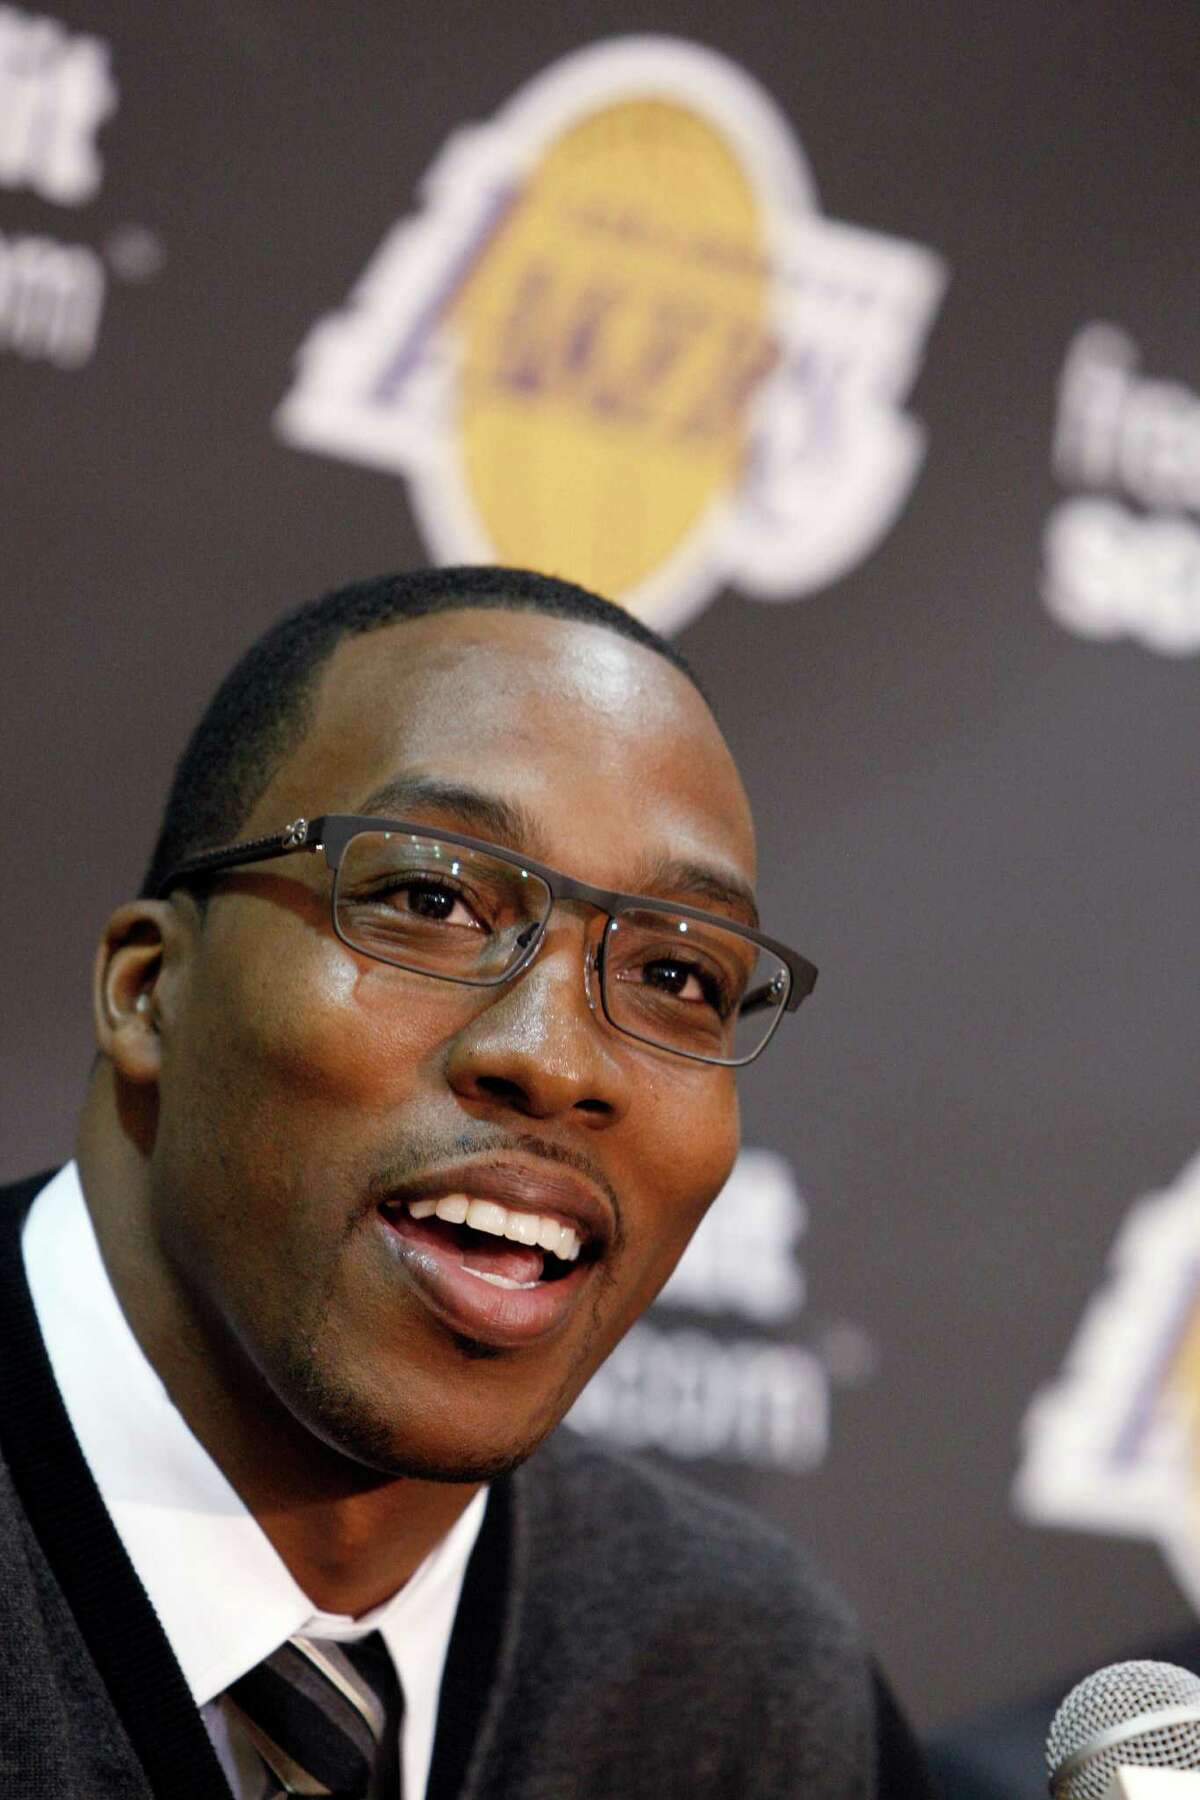 Center Dwight Howard, newly acquired by the Los Angeles Lakers from the Orlando Magic, speaks at a news conference at the NBA basketball team's headquarters in El Segundo, Calif., Friday, Aug. 10, 2012. (AP Photo/Reed Saxon)